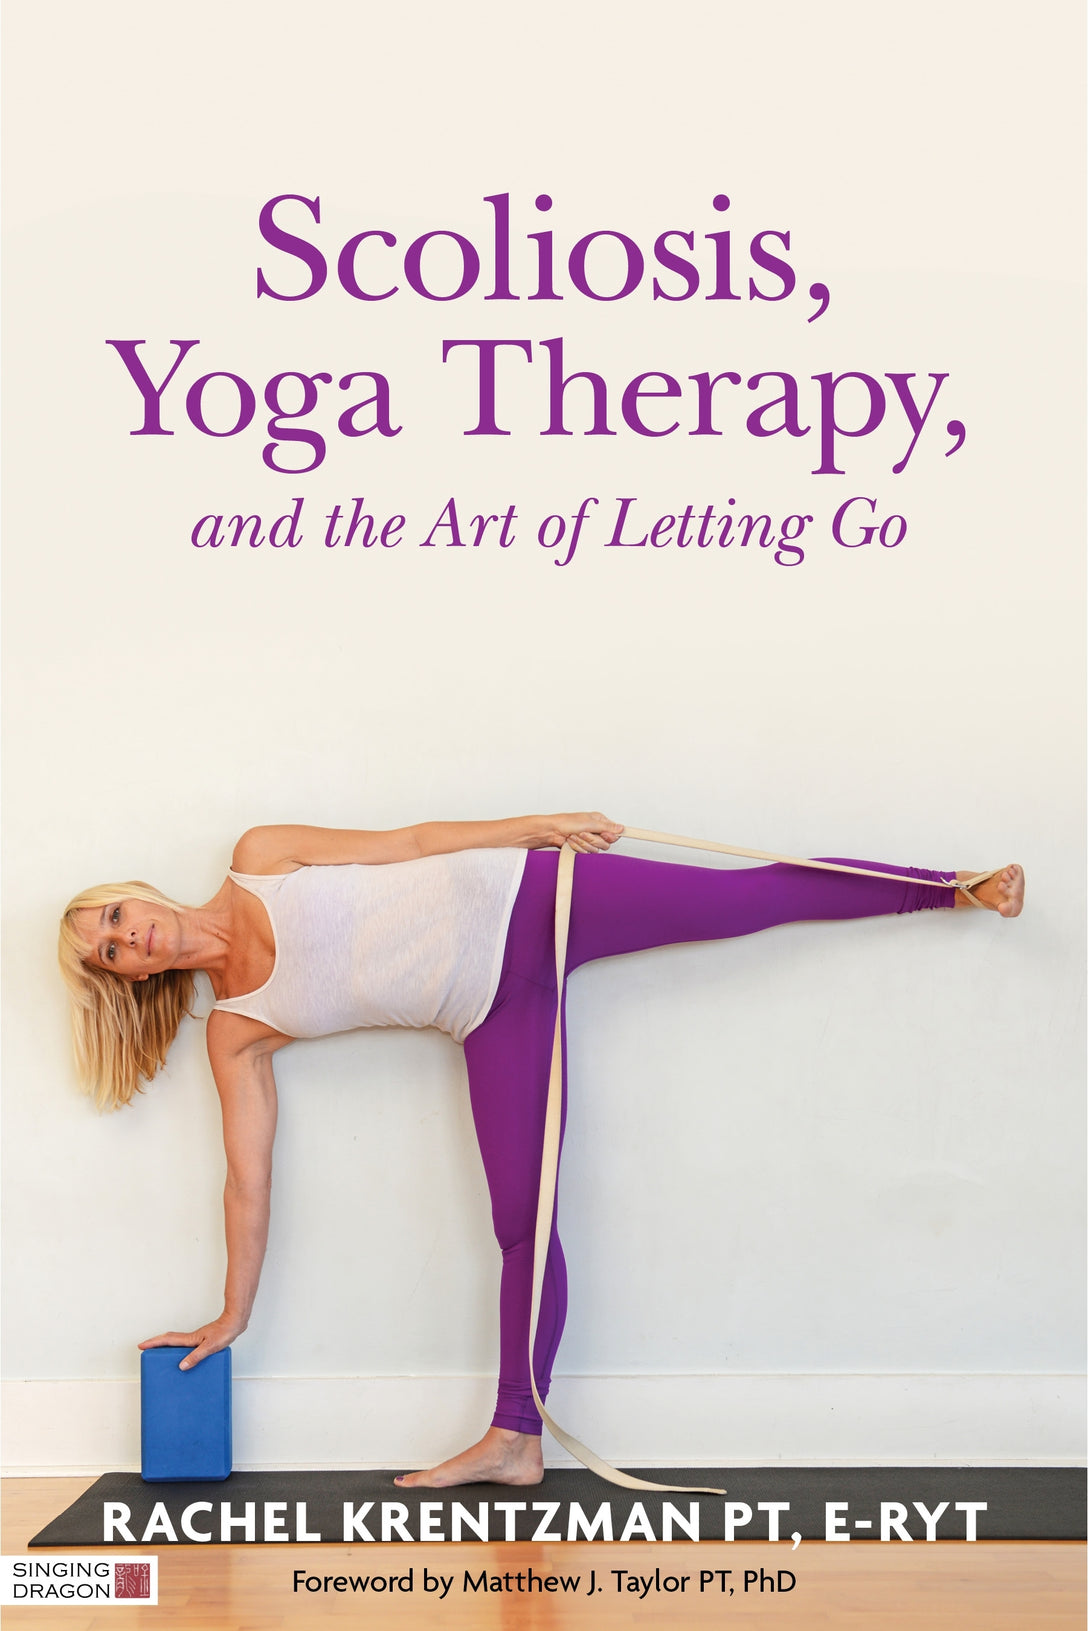 Scoliosis, Yoga Therapy, and the Art of Letting Go by Rachel Krentzman, Matthew J. Taylor